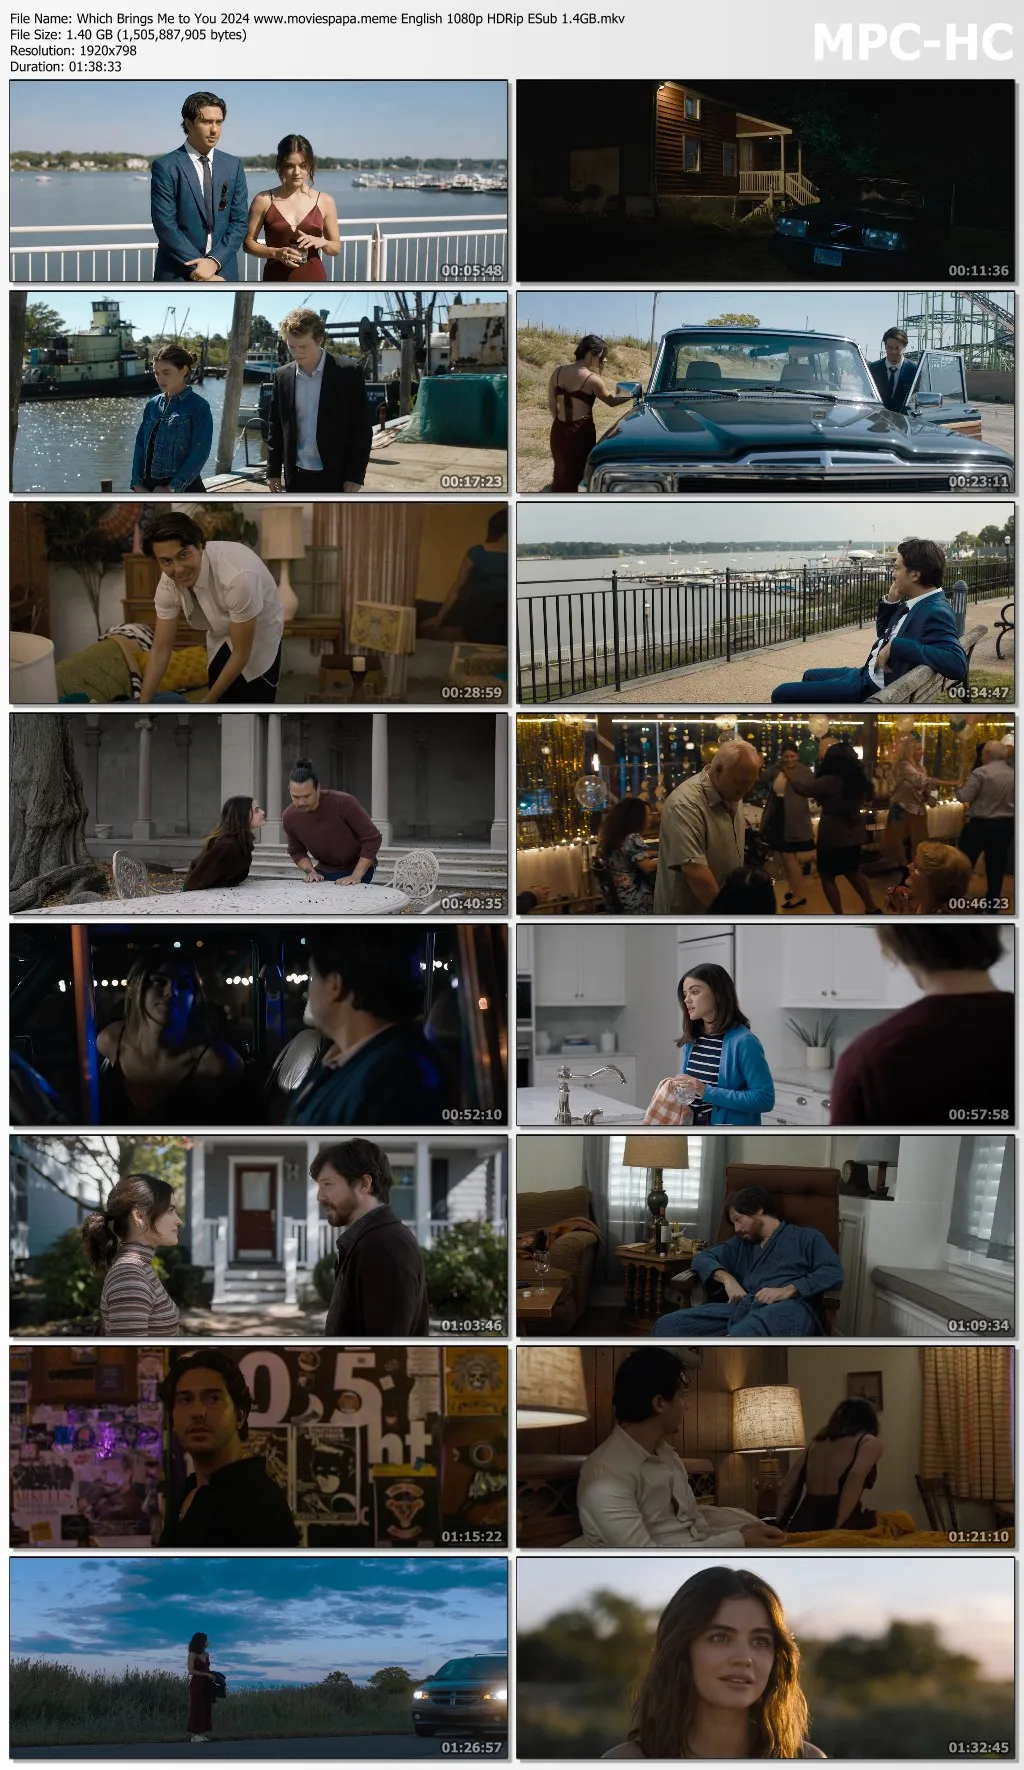 Which Brings Me to You 2024 English 1080p | 720p | 480p HDRip ESub Download